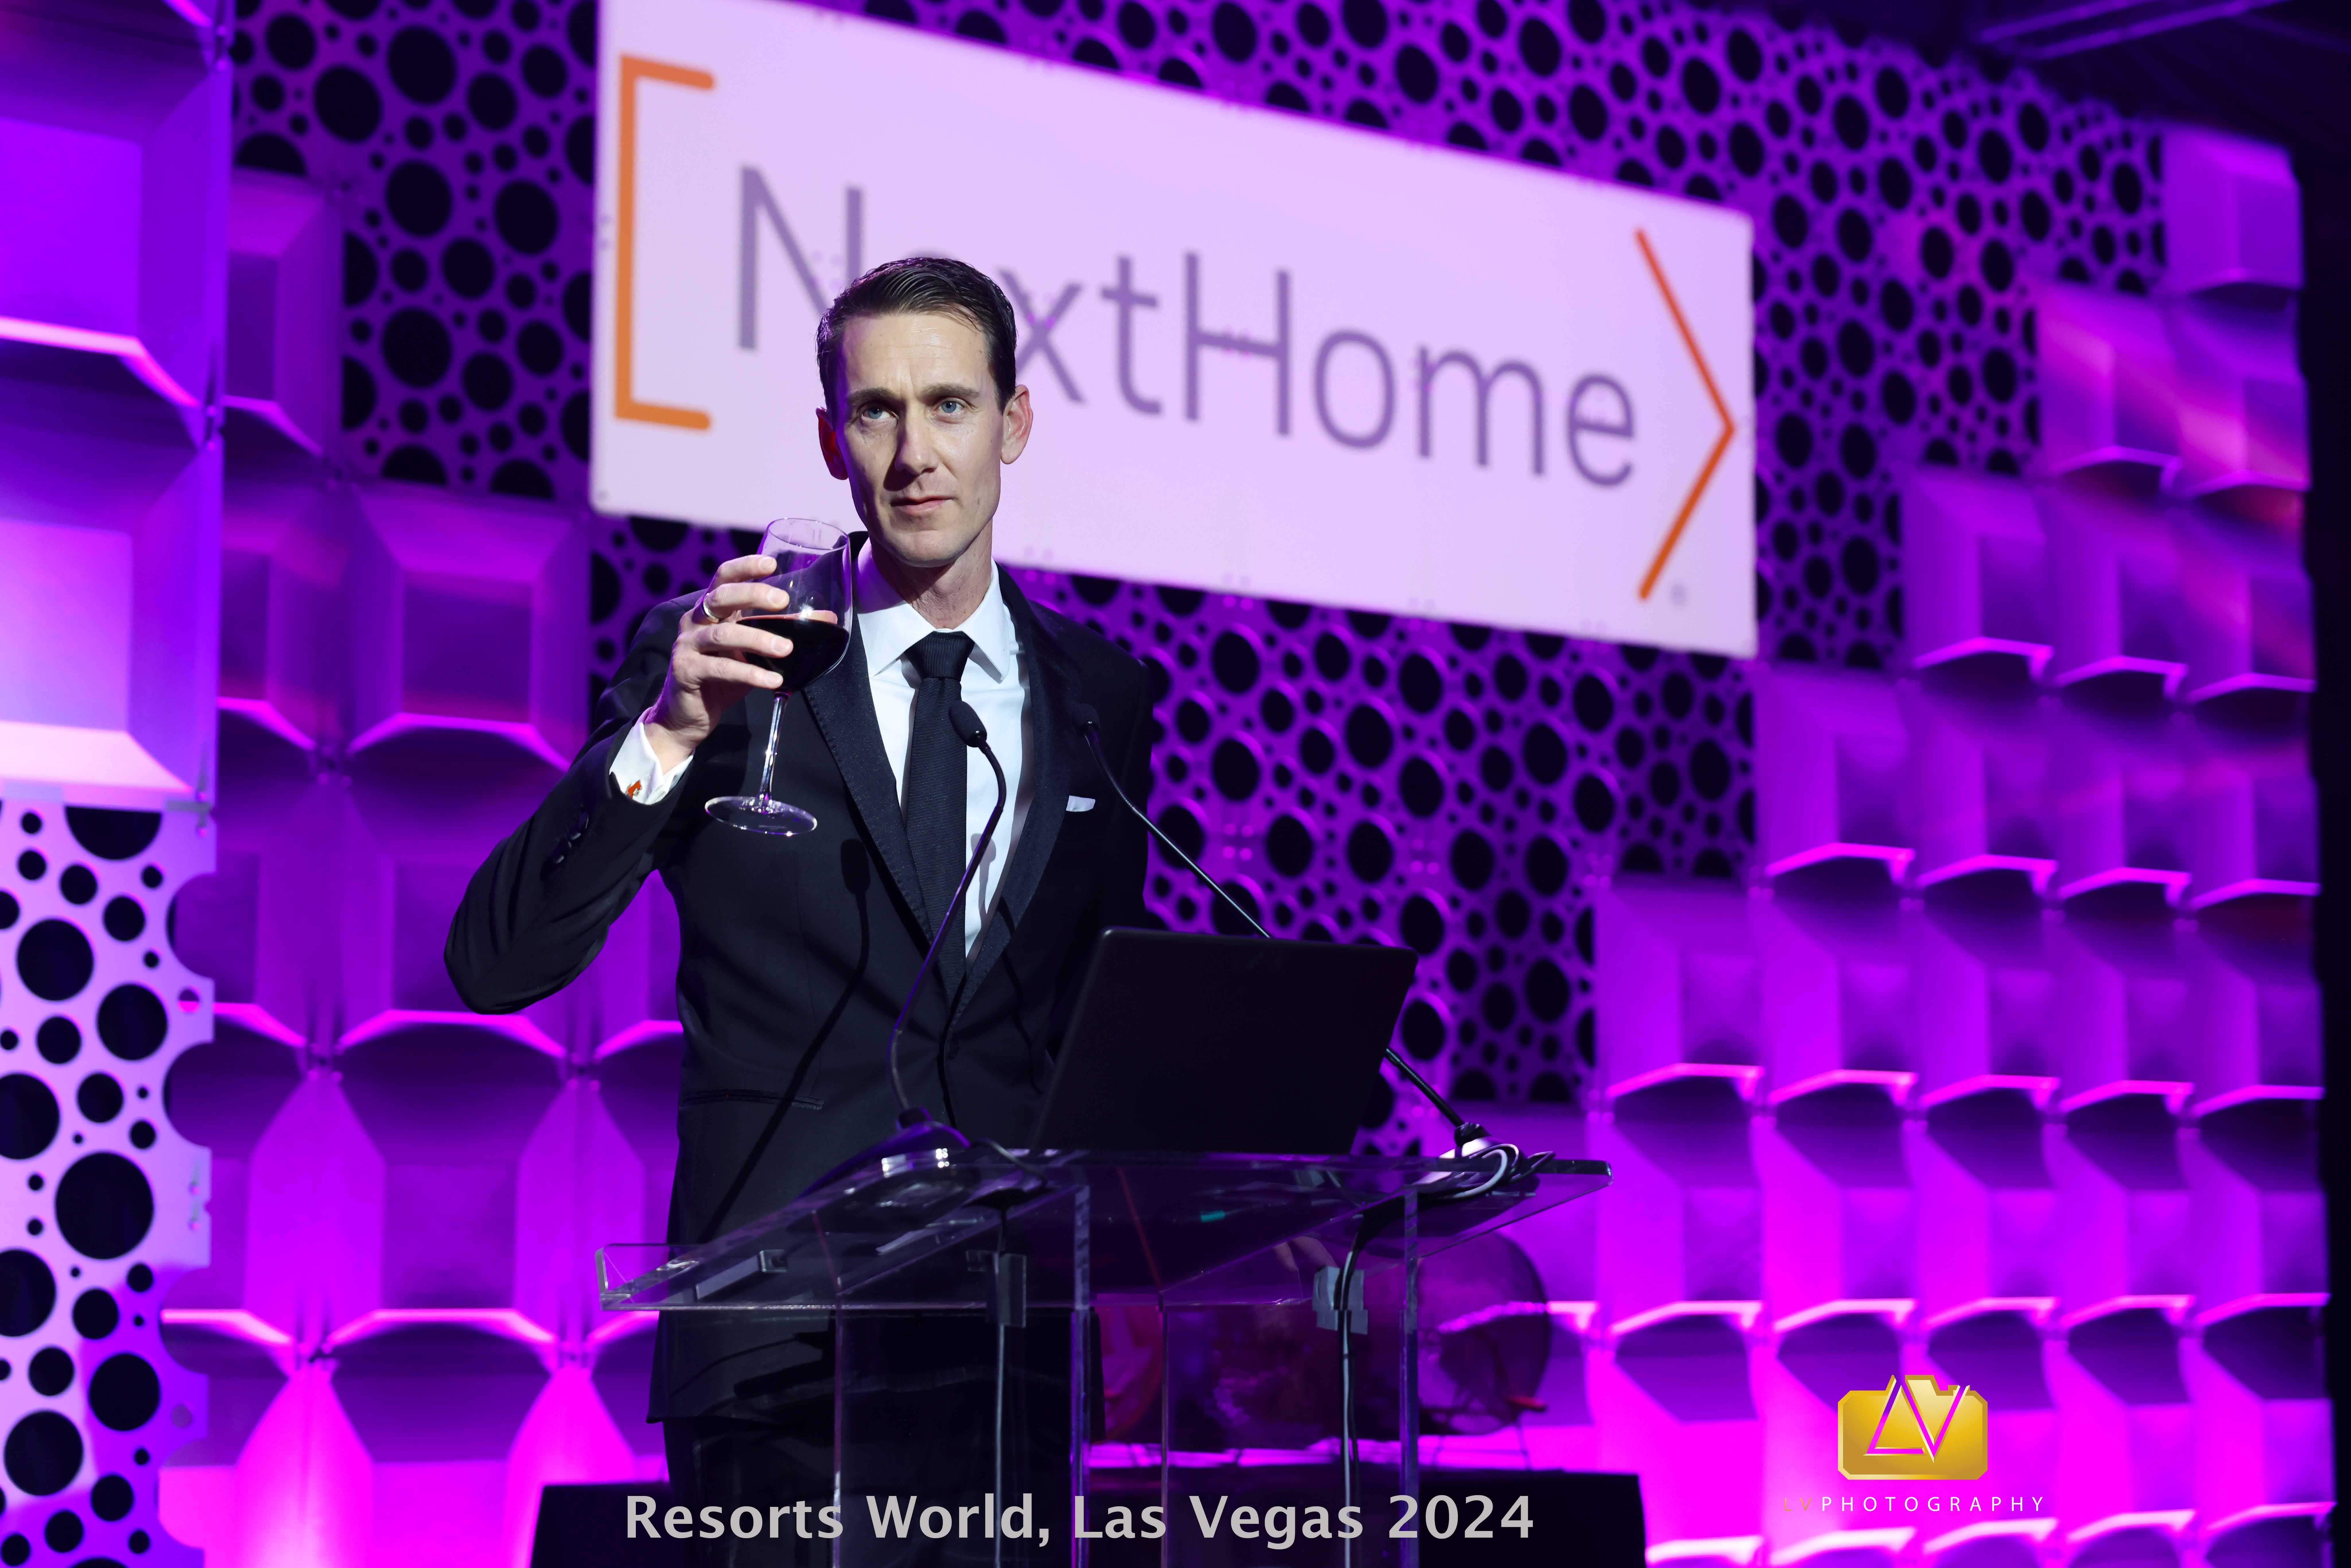 Best Event Photographer for events and awards in las vegas 